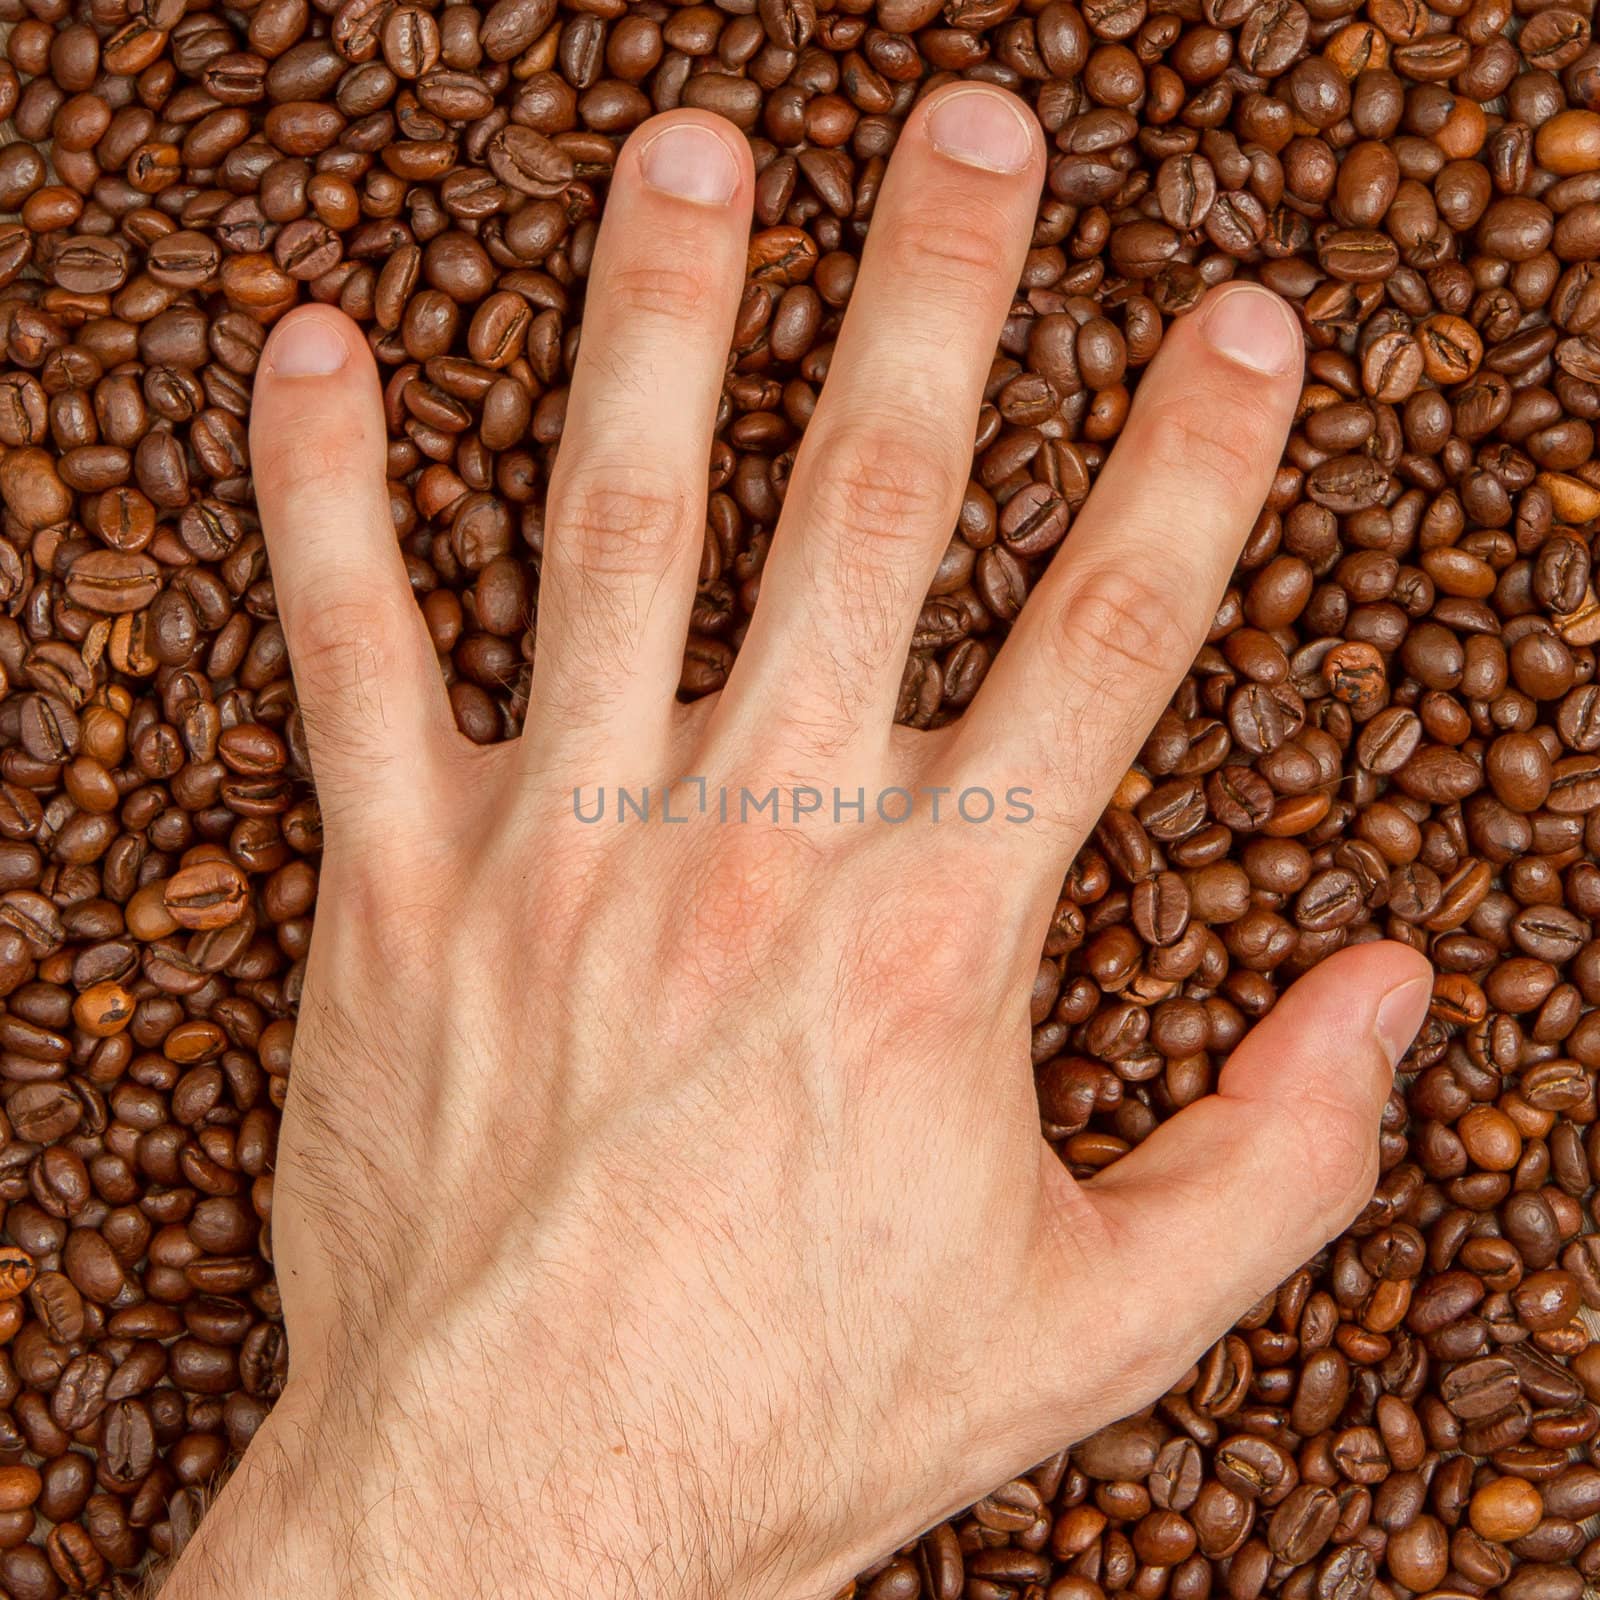 Coffee beans in hand by michaklootwijk